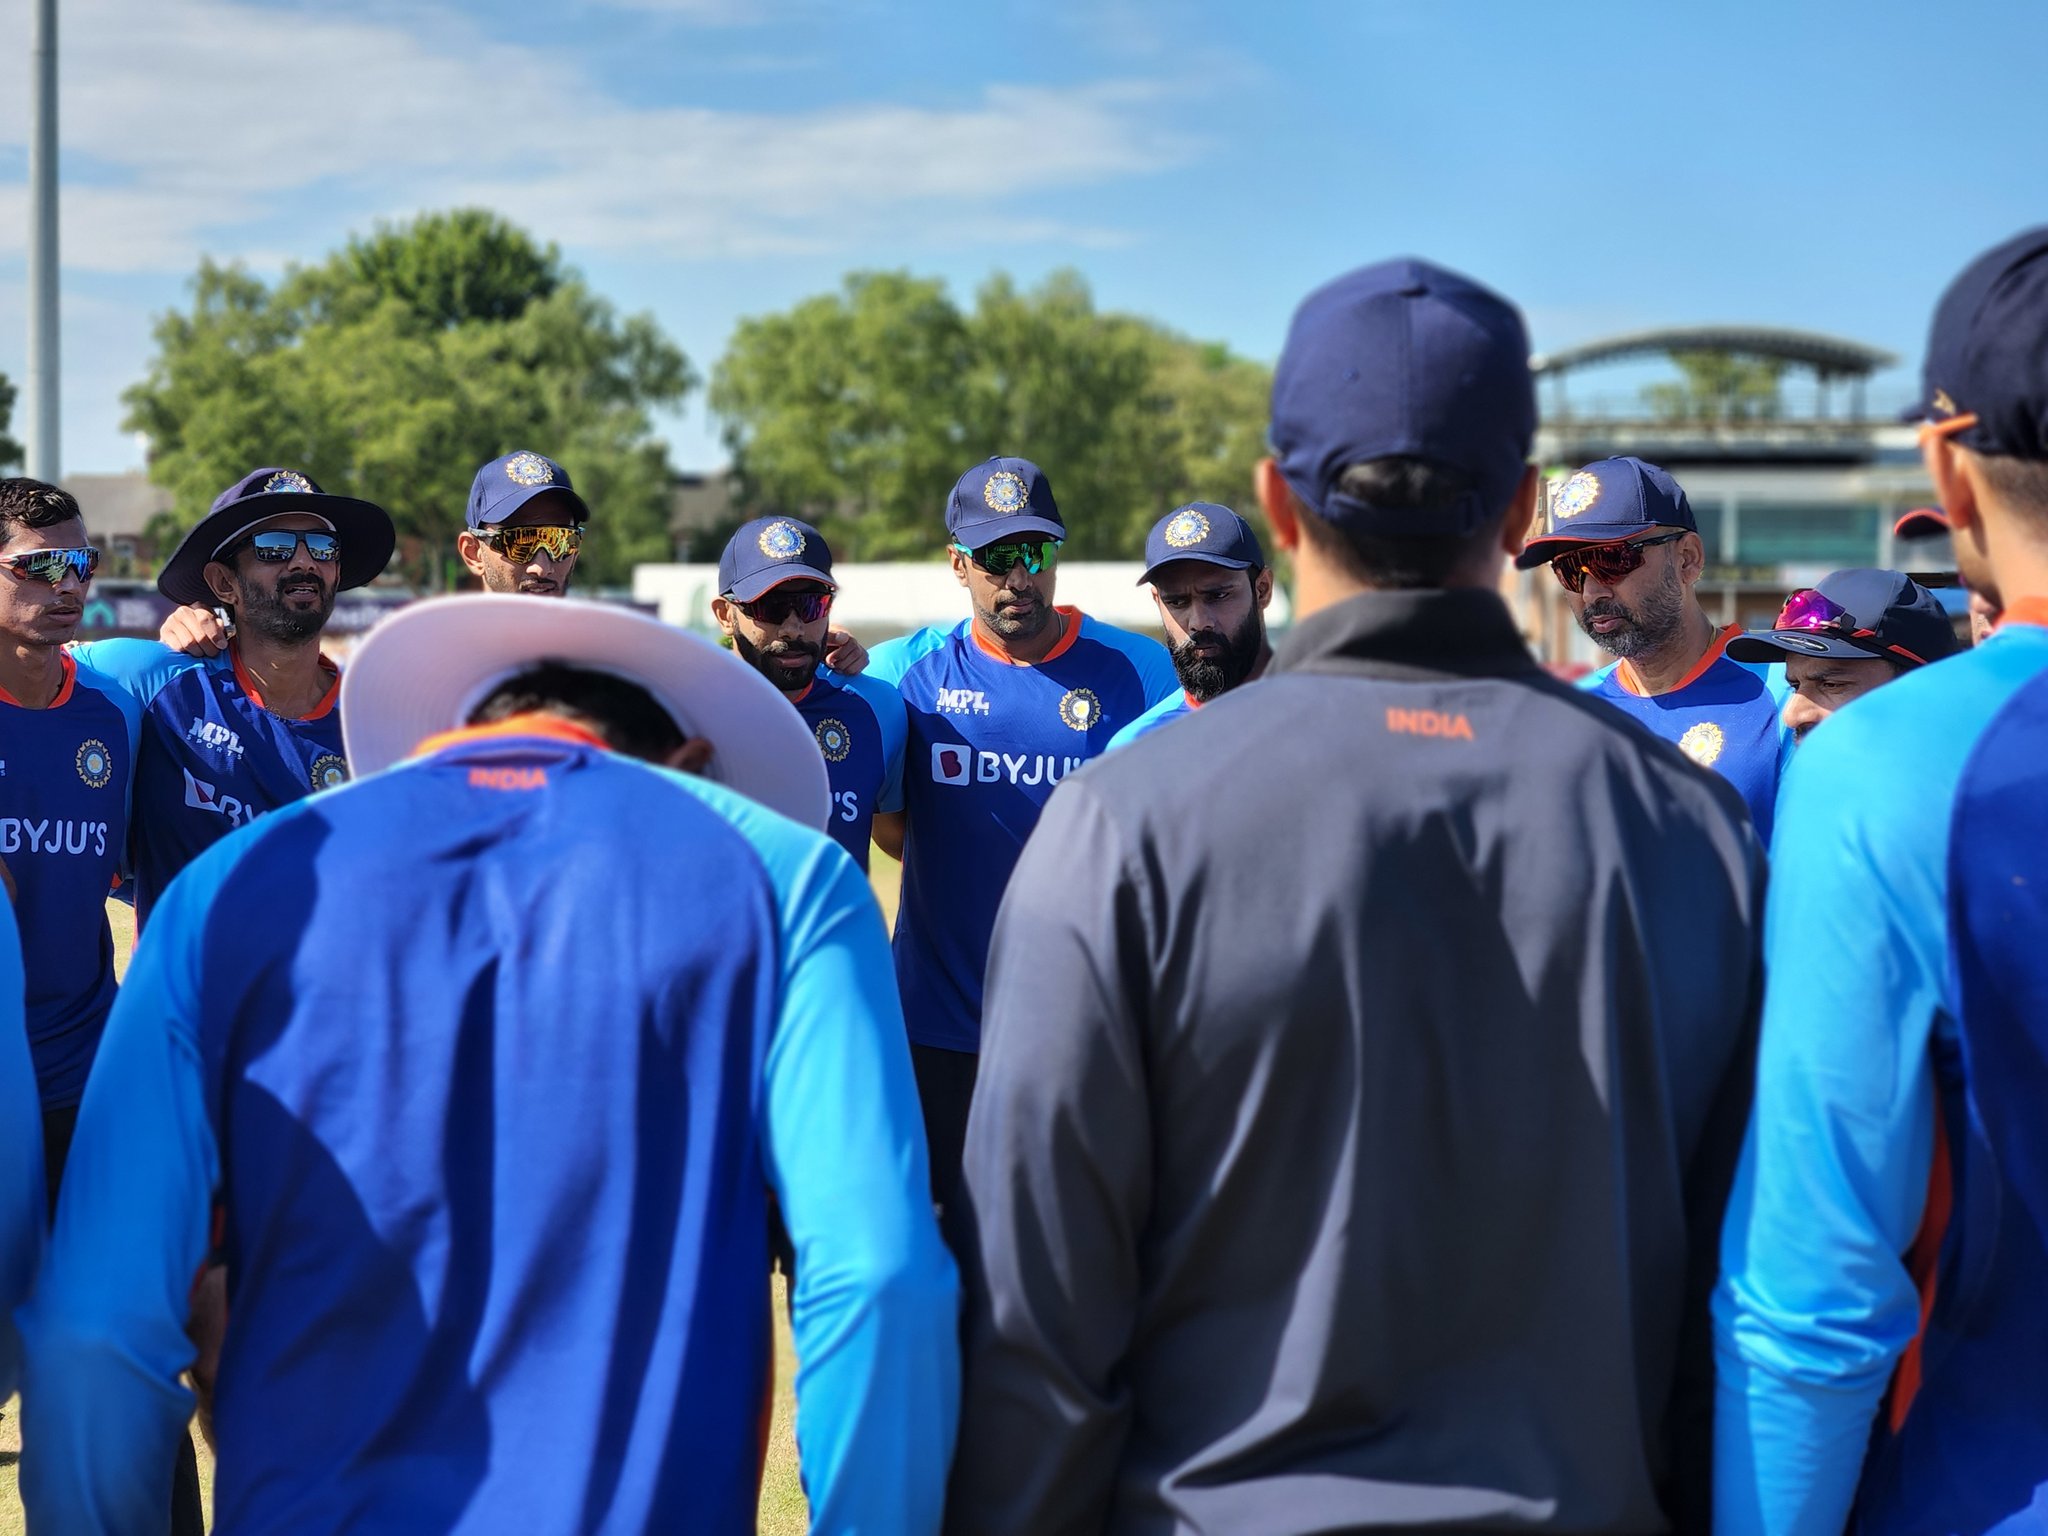 IND vs ENG LIVE: Big boost for Team India, Ravichandran Ashwin joins Indian camp ahead of warm-up fixture vs Leicestershire, takes part in team huddle - Check pics